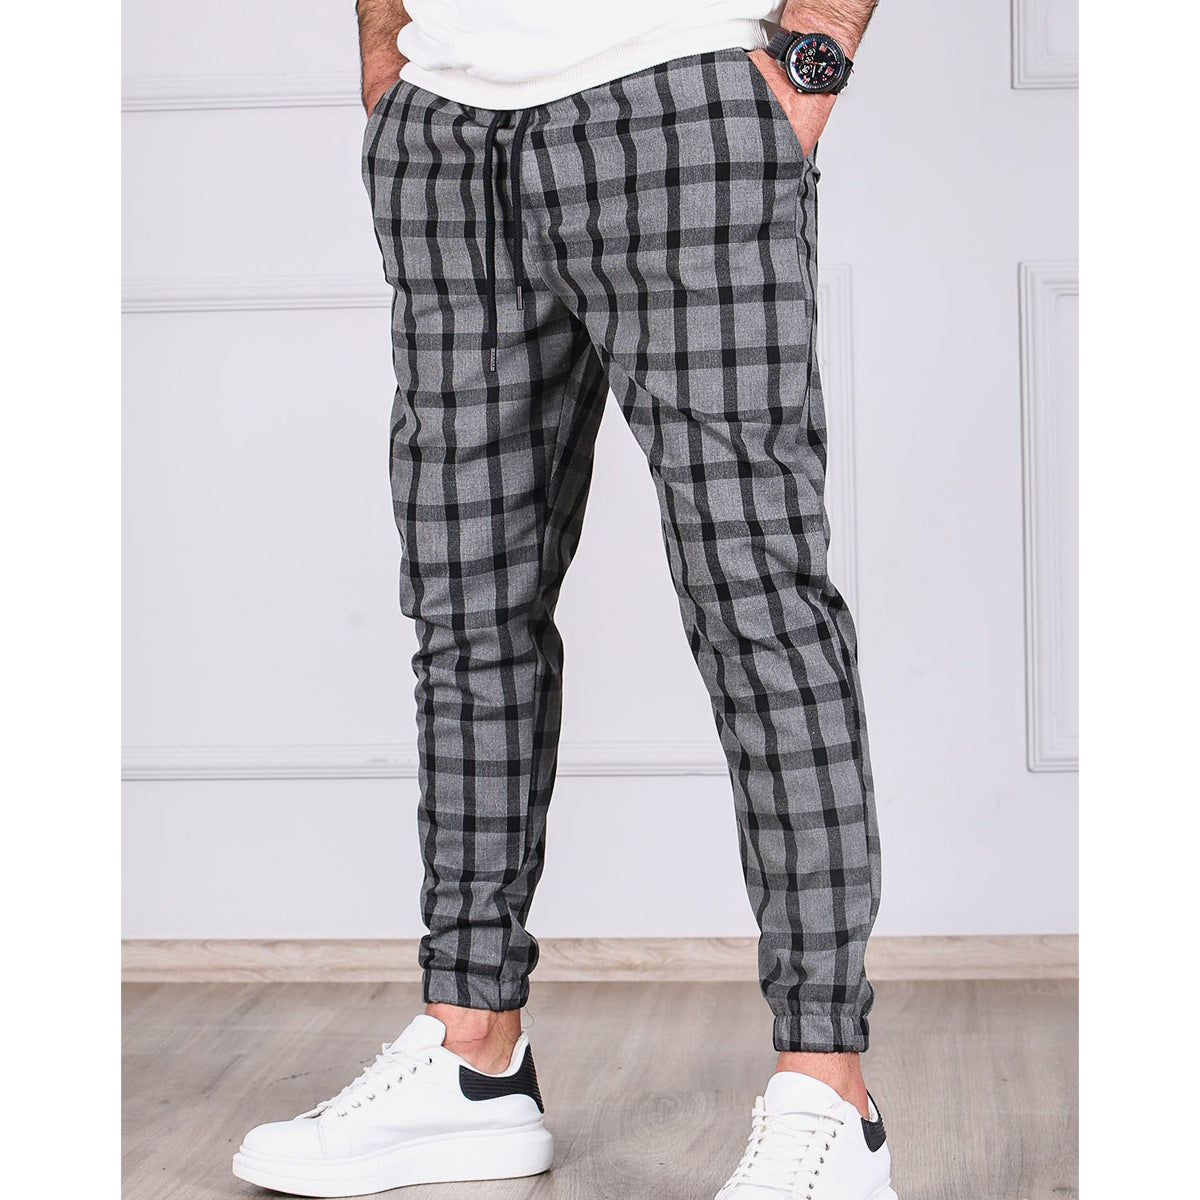 Perix hose with grid pattern